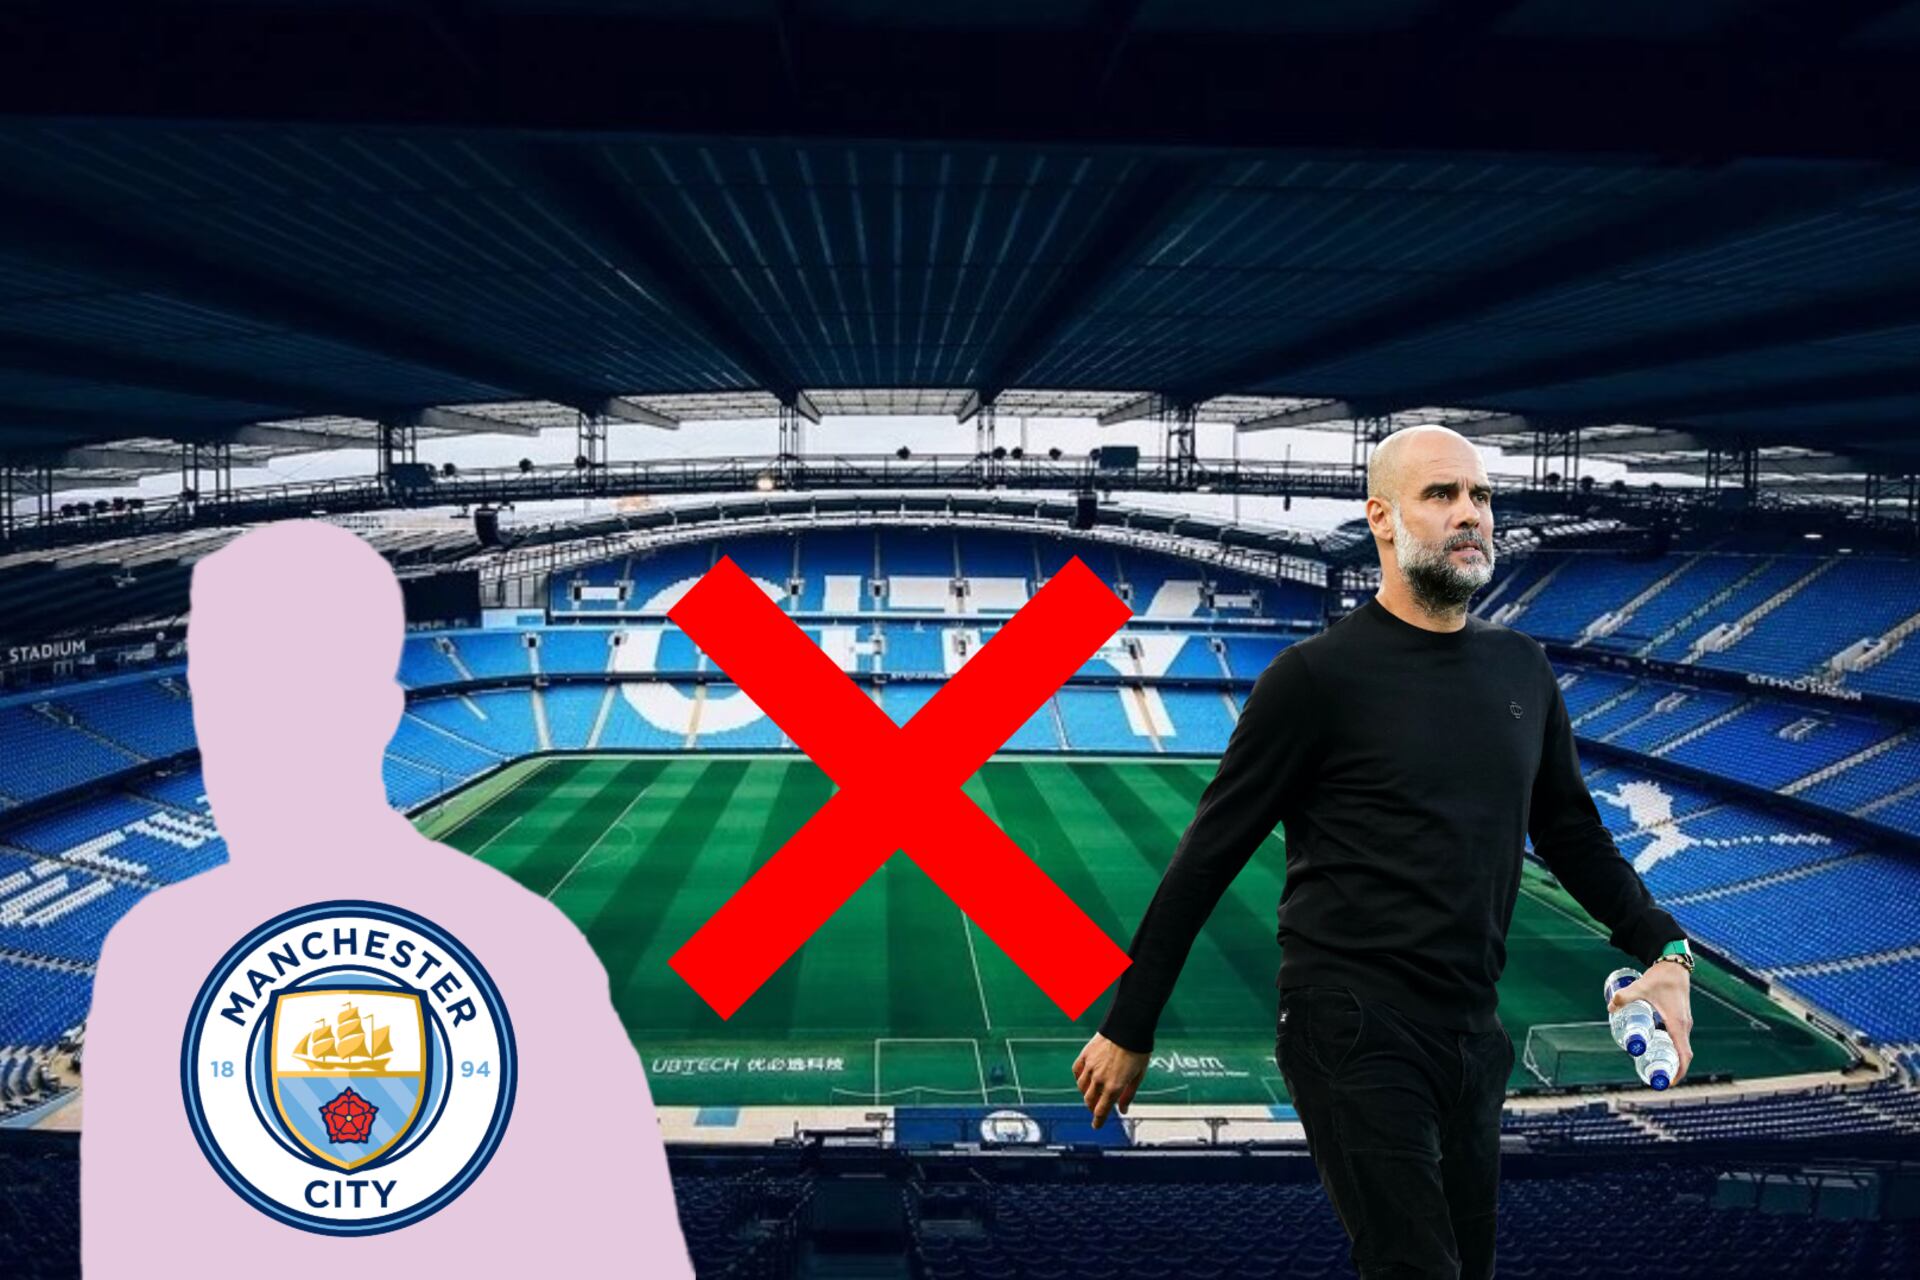 Broken relationship? A Manchester City player suggests Pep Guardiola is a liar